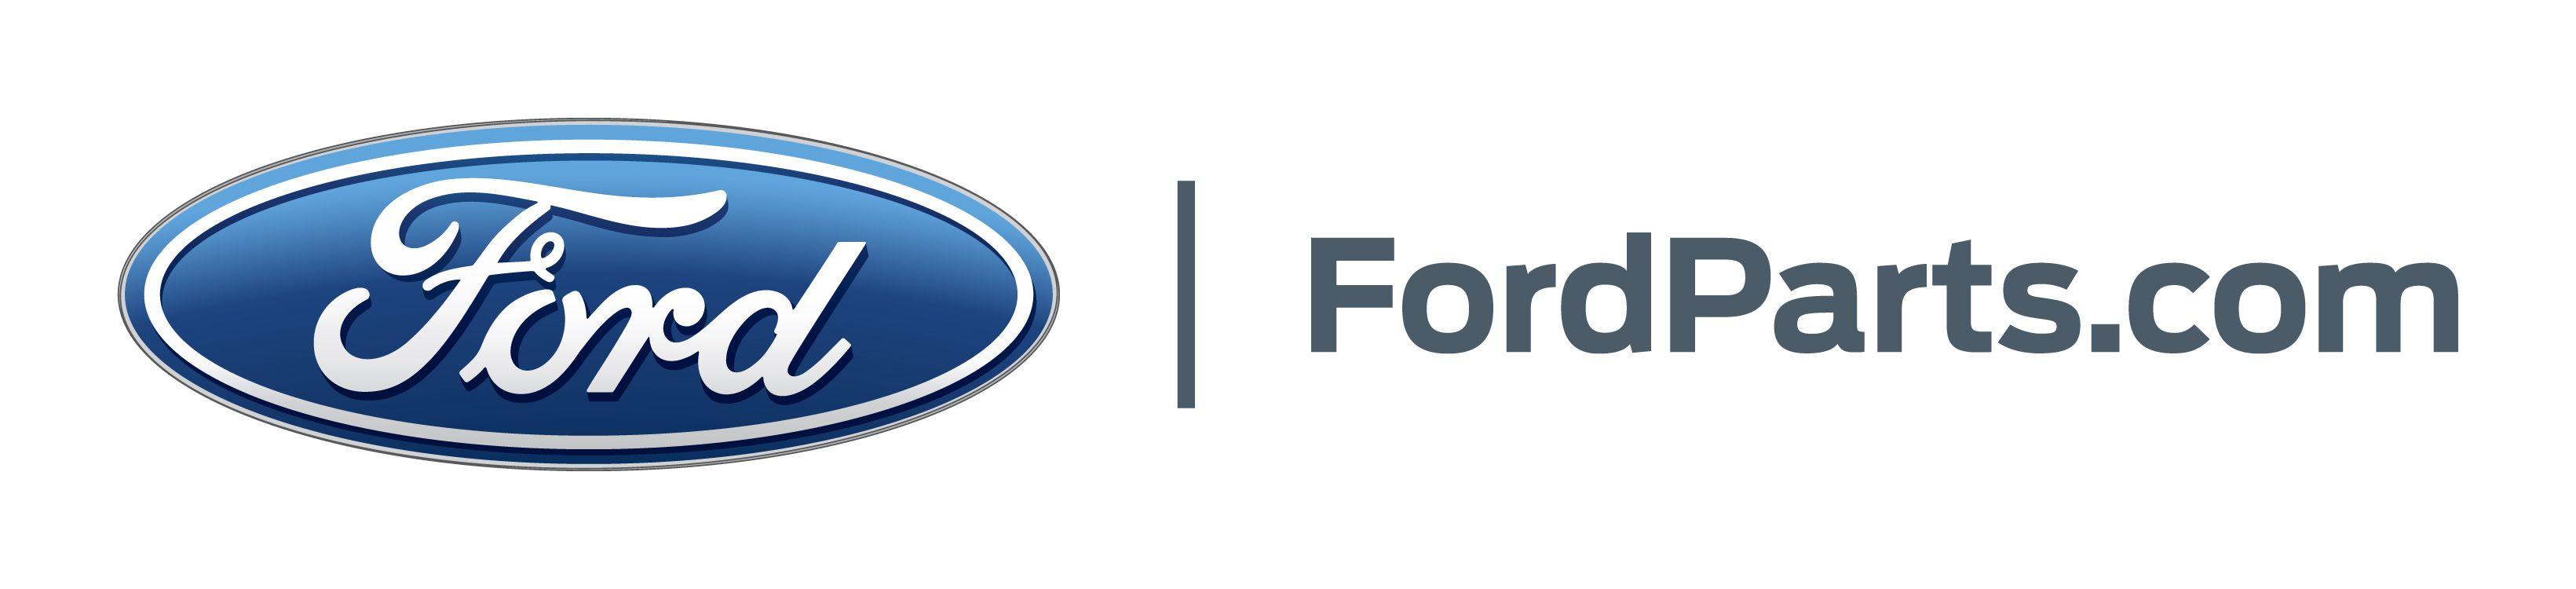 Ford.com Logo - Ford | Global Brand Protection